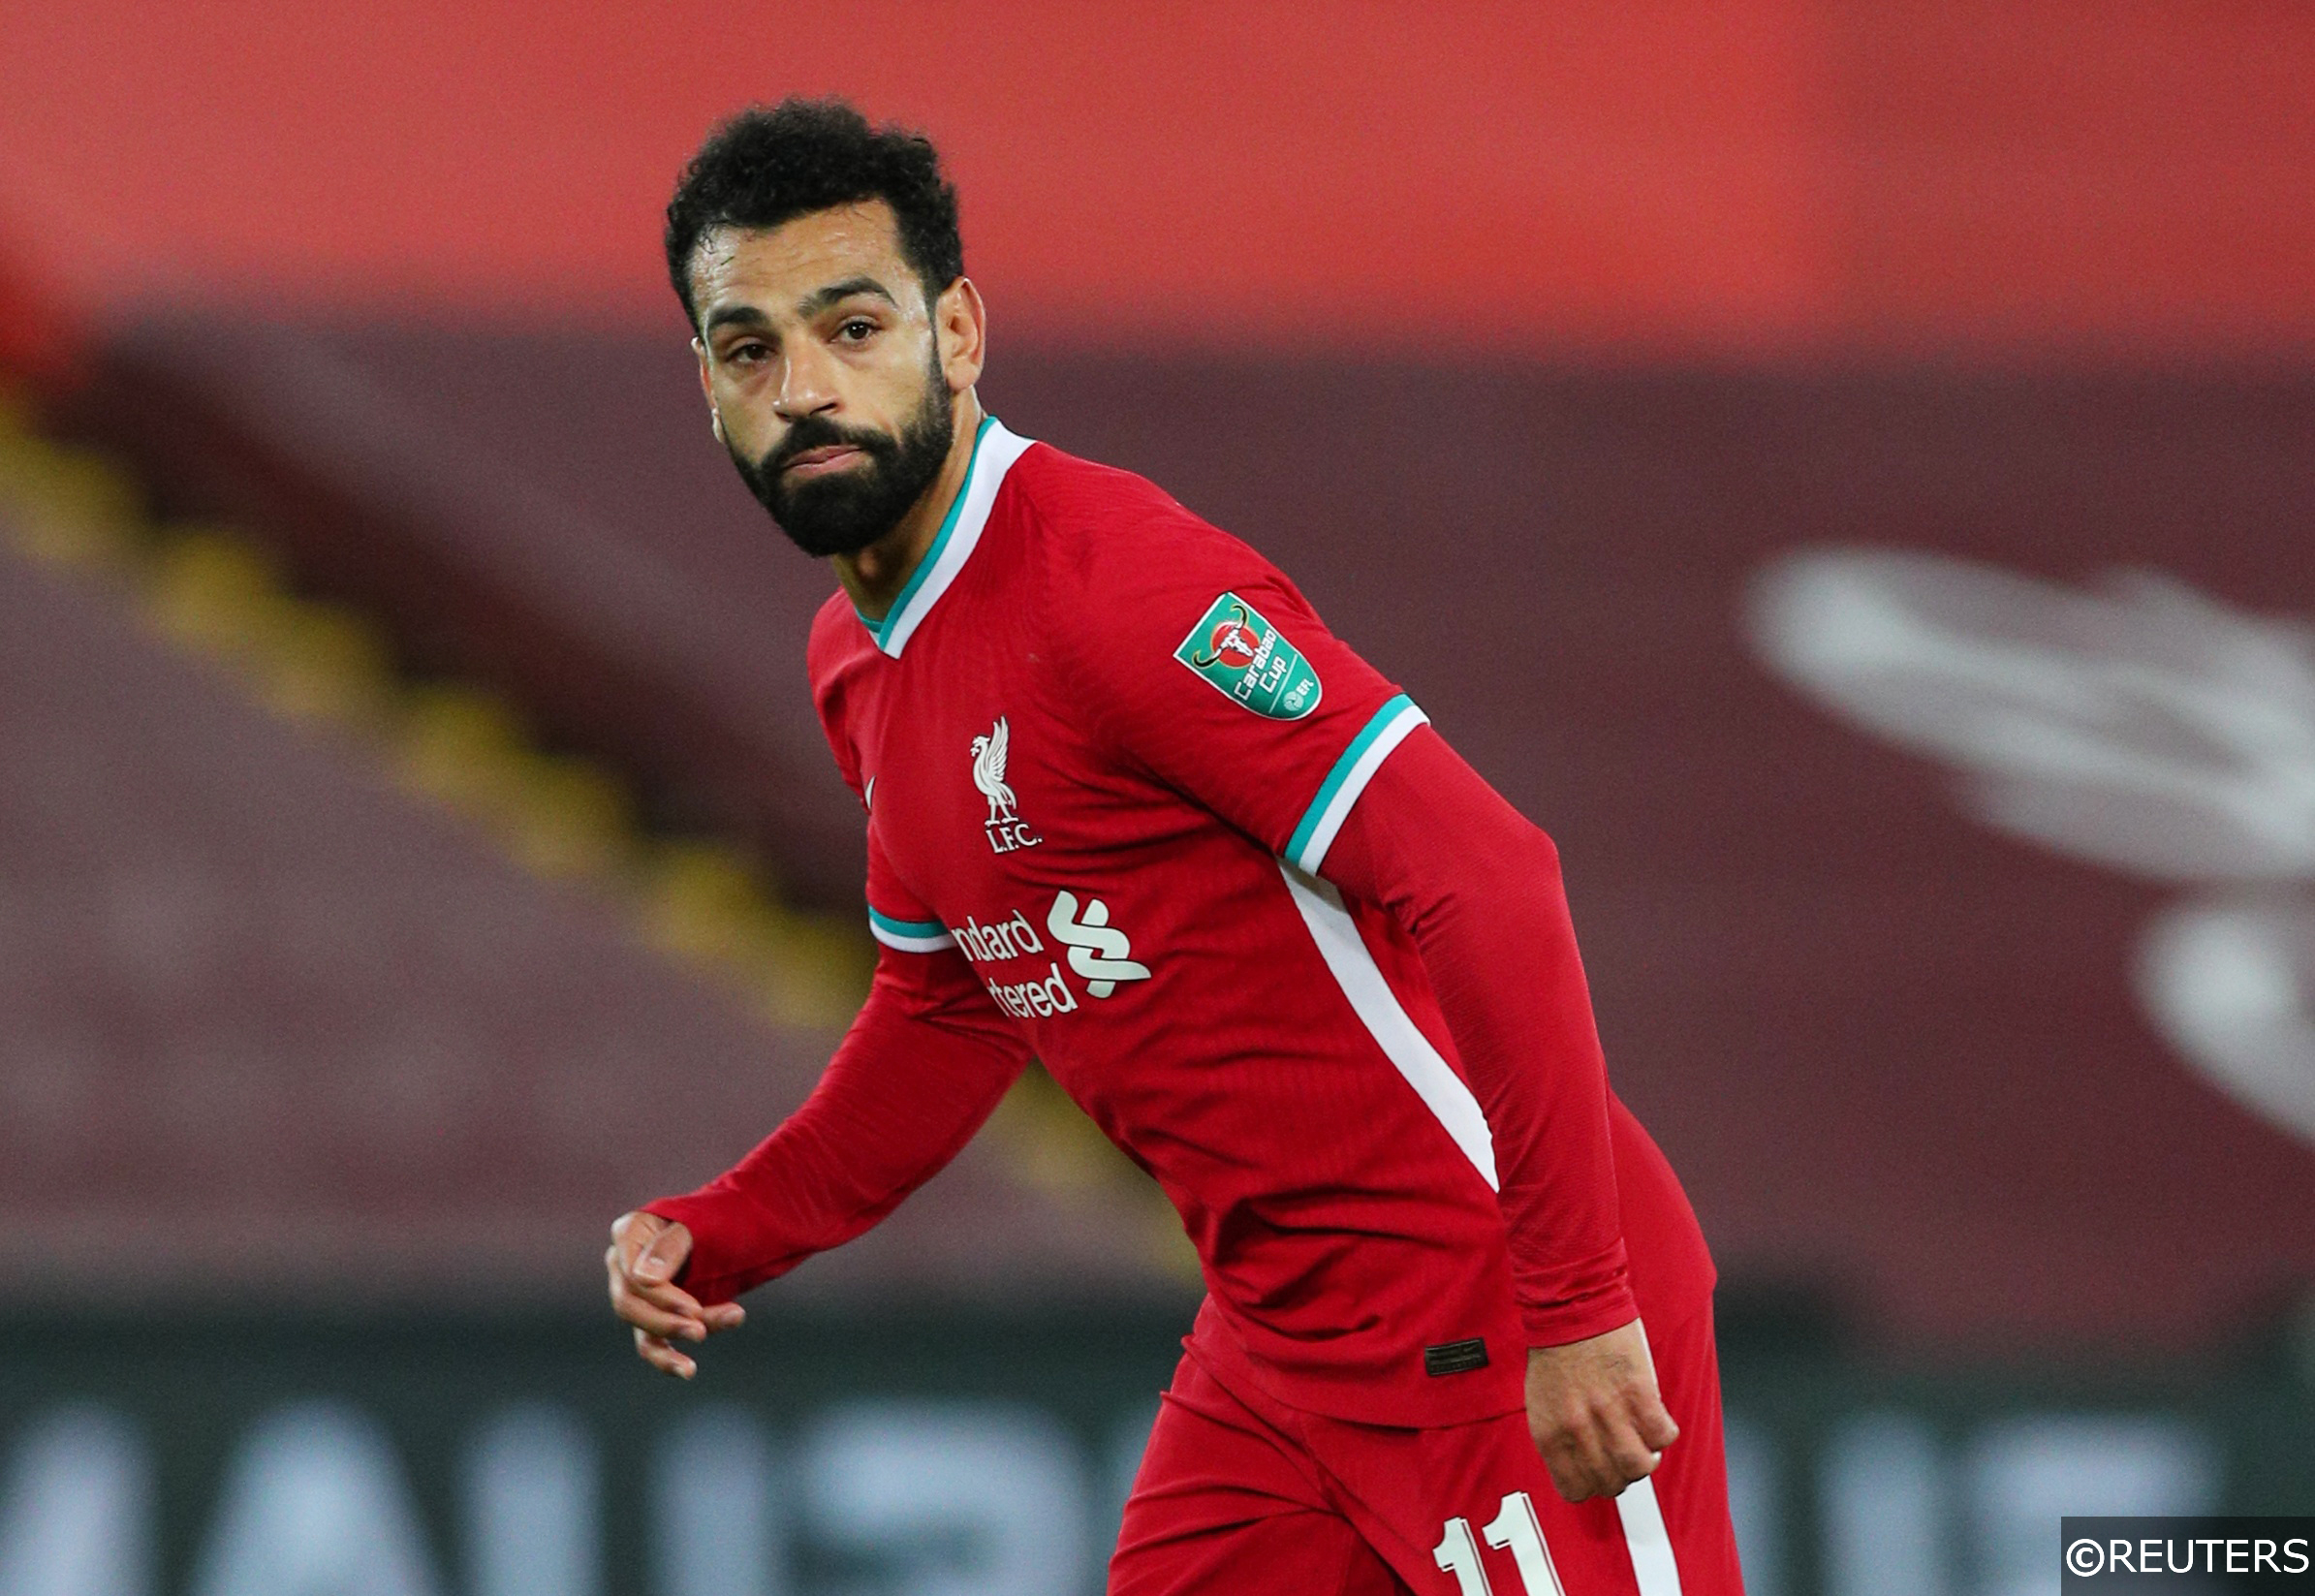 COMPLIANT - Liverpool's Mo Salah in the FA Cup